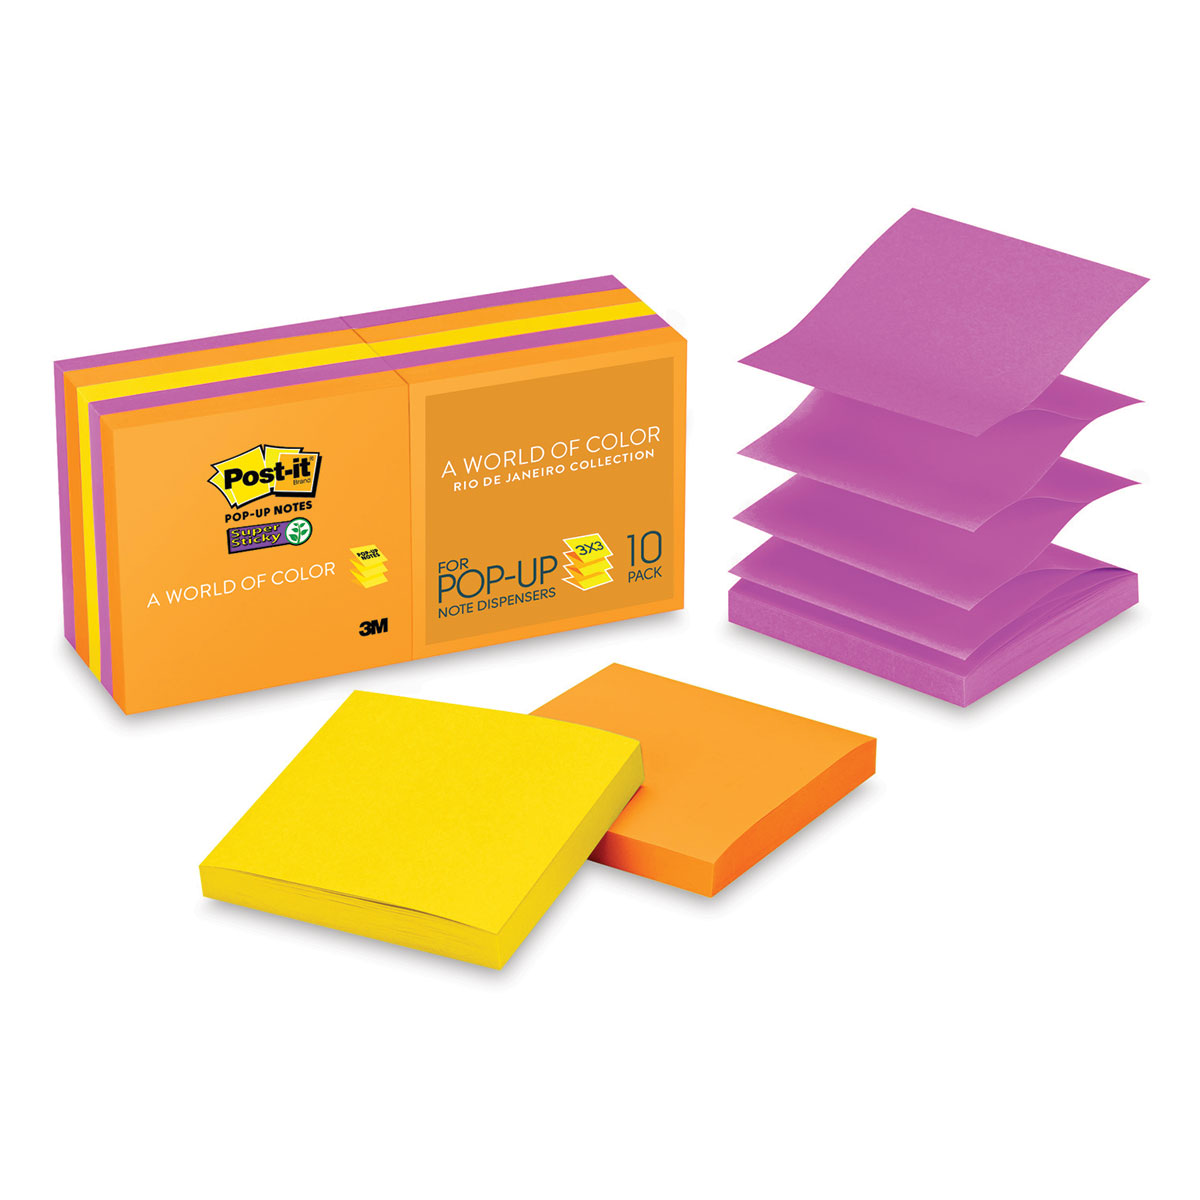 Post-it™ Super Sticky Notes 6845-SSP-1PK 8 in x 6 in Rio de Janeiro  Collection 3M 7010371190